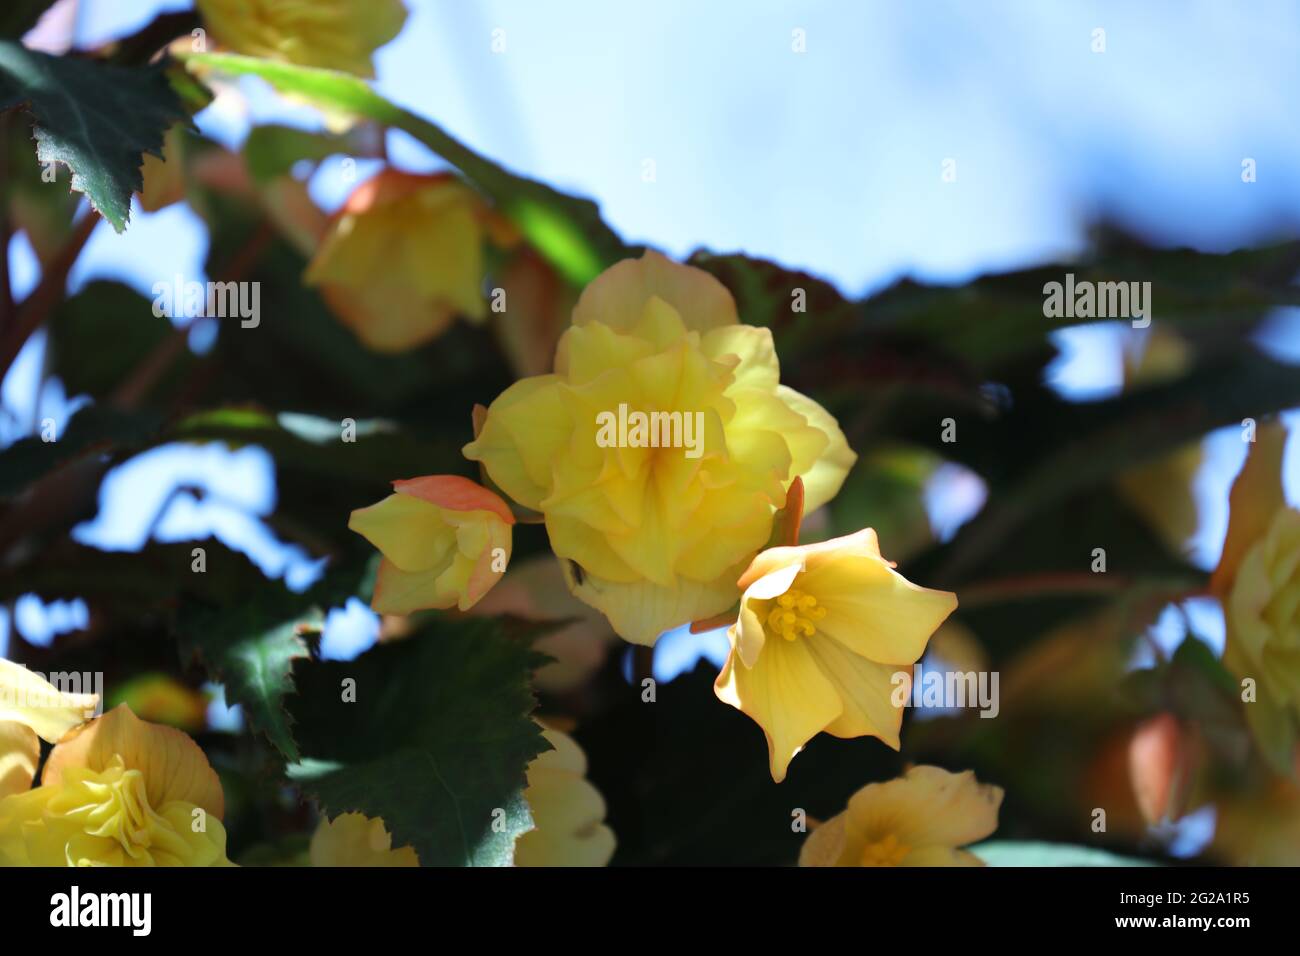 Double Apricot Begonia with yellow and peach flowers, blooming in the spring Stock Photo